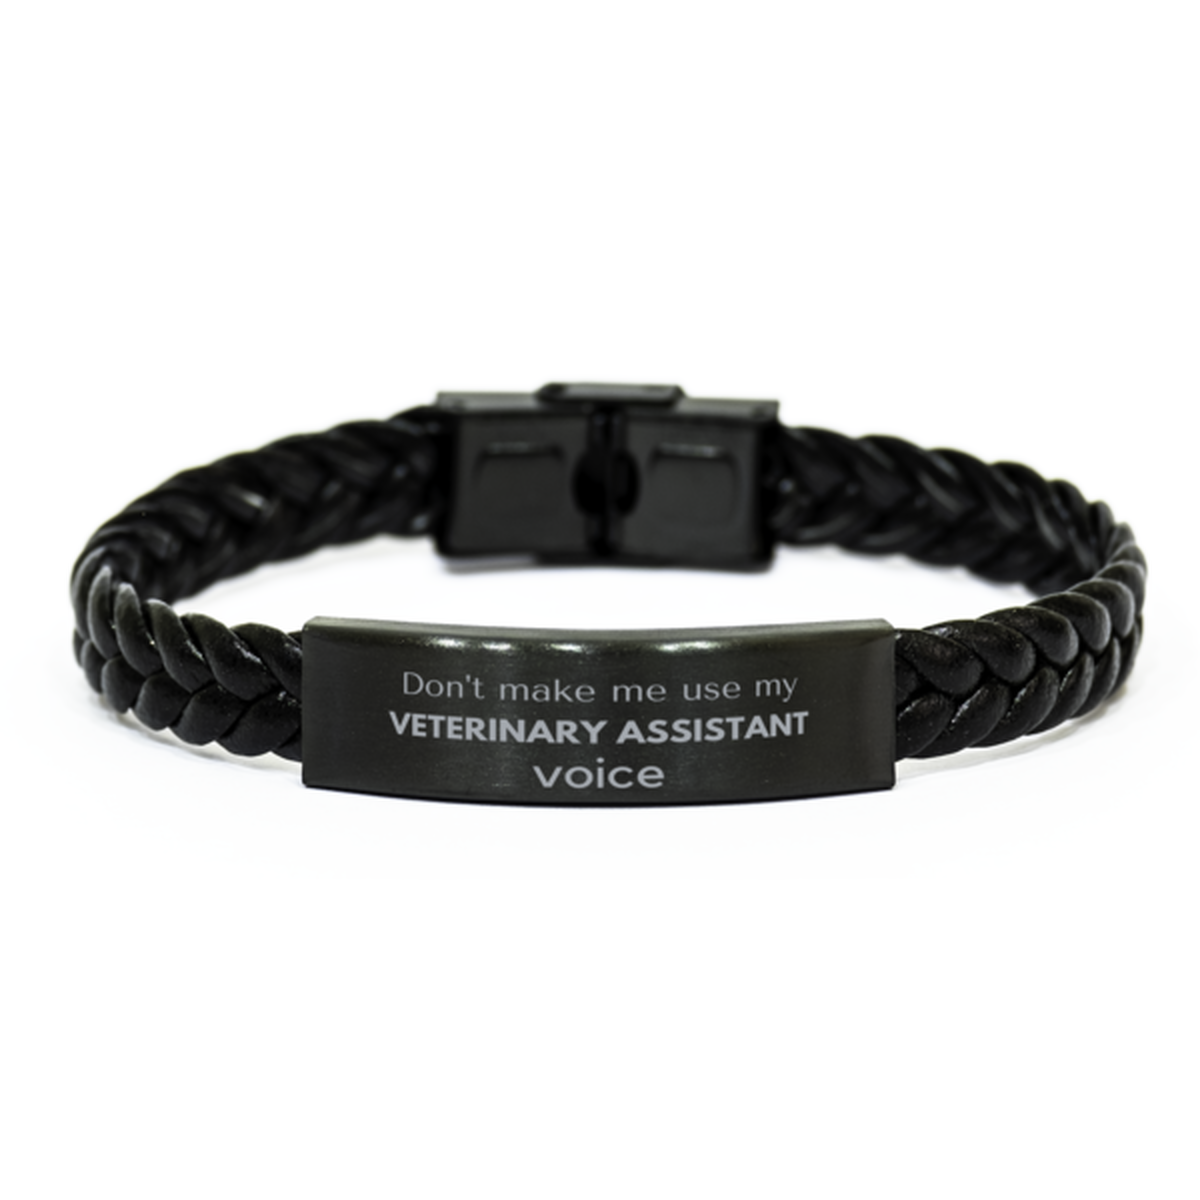 Don't make me use my Veterinary Assistant voice, Sarcasm Veterinary Assistant Gifts, Christmas Veterinary Assistant Braided Leather Bracelet Birthday Unique Gifts For Veterinary Assistant Coworkers, Men, Women, Colleague, Friends